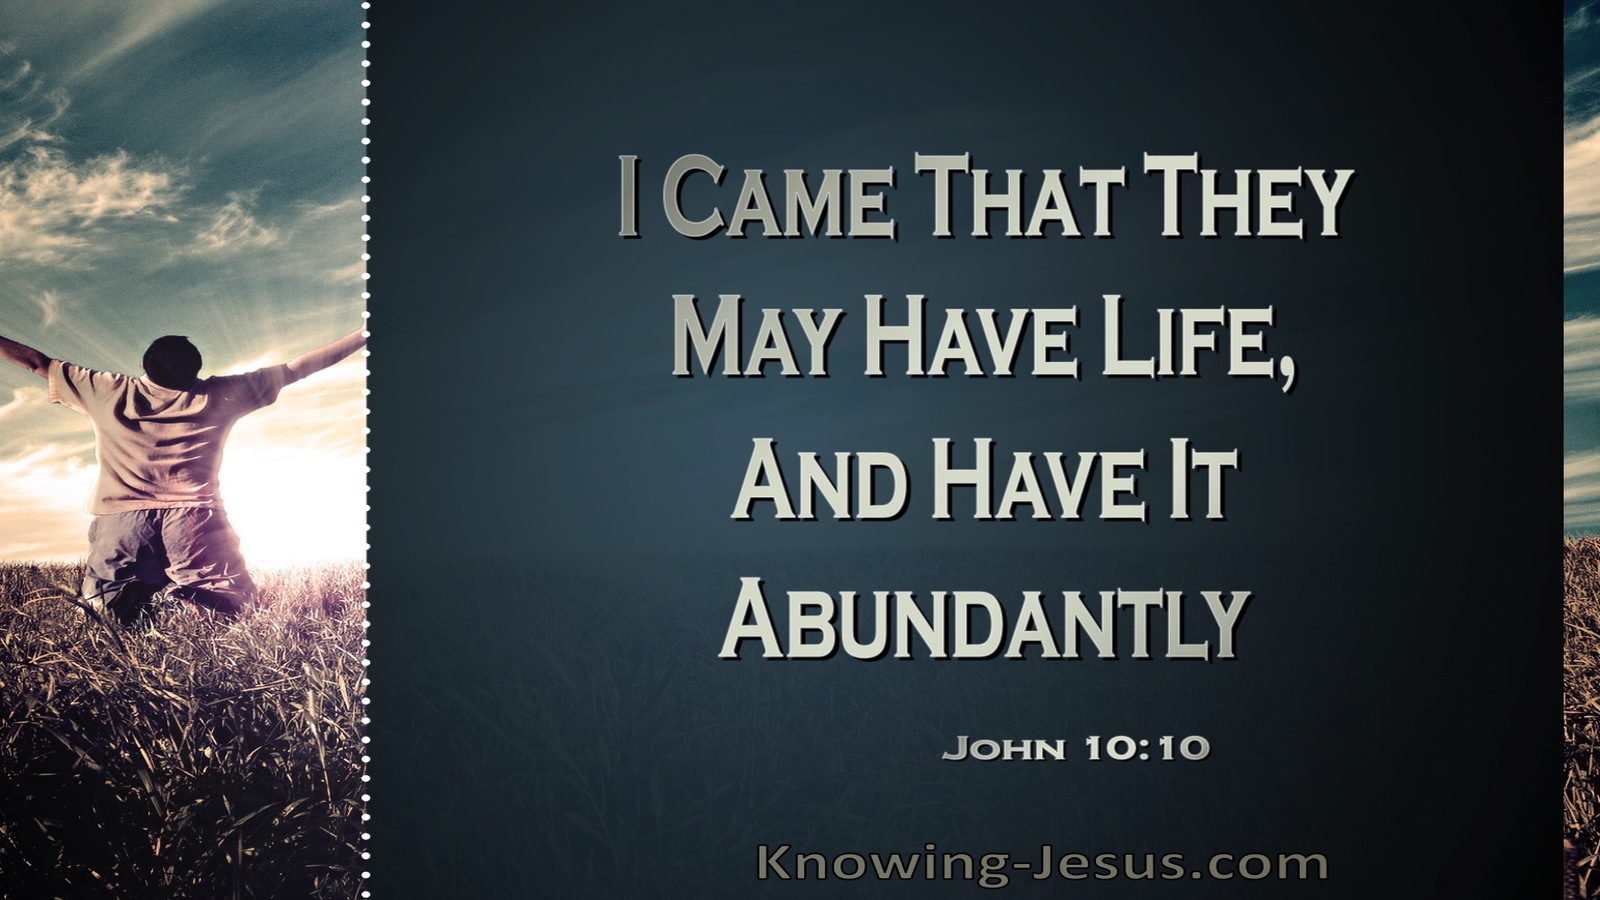 John 10:10 Jesus Came That They Might Have Life (windows)01:23